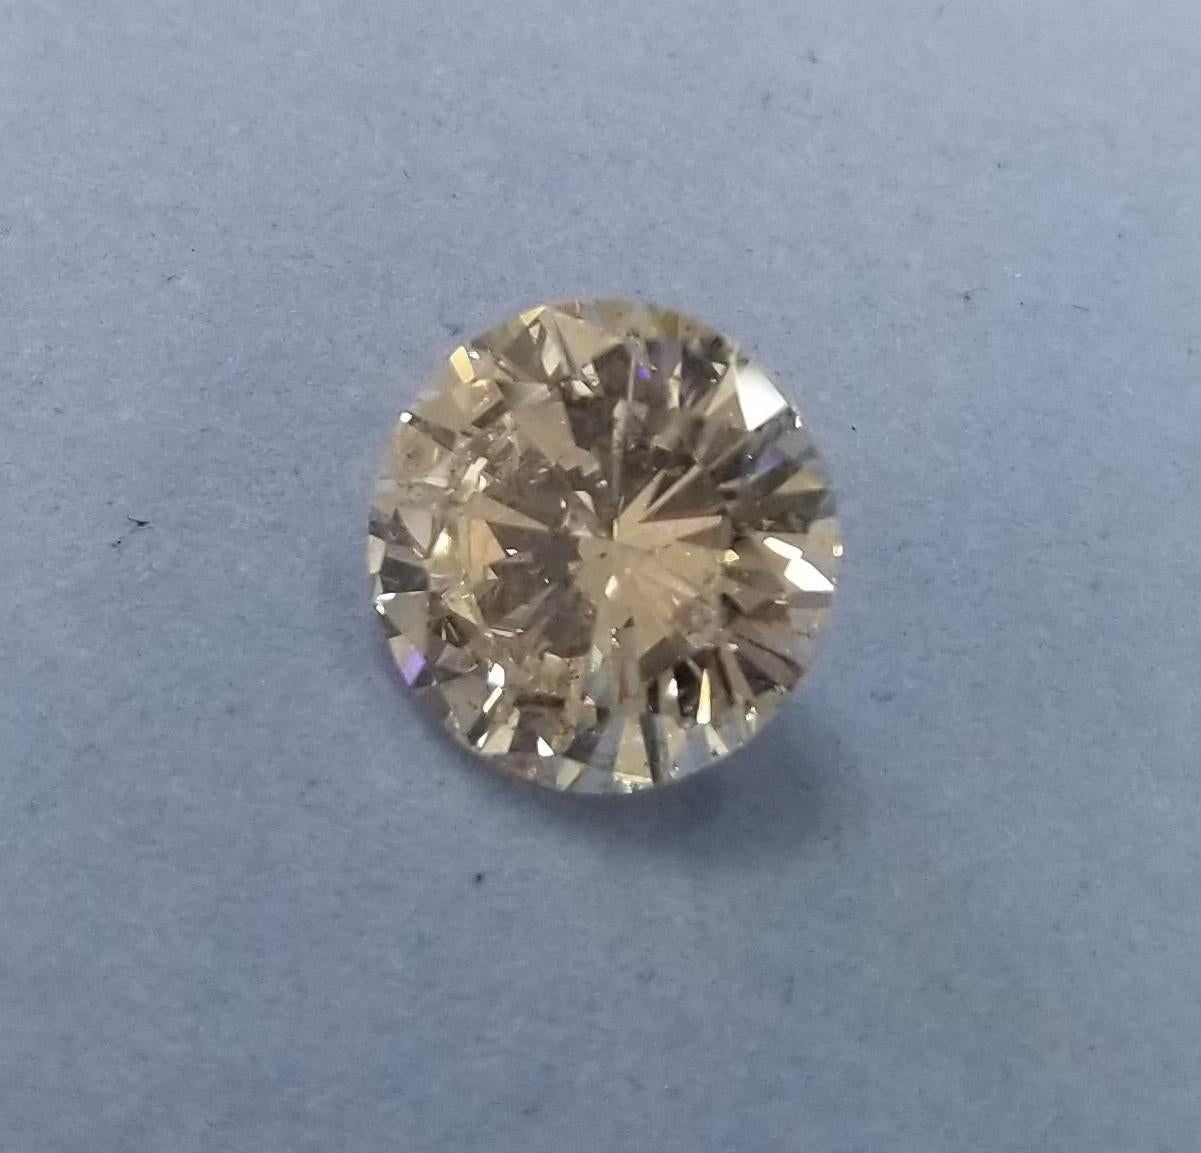 *Motivated to Sell – Please make a Fair Offer*
EGL Certified 5.24 carat H color and SI2 clarity 
11.38 - 11.27 - 6.68
Depth: 59.0  Table: 66  Girdle: TN - M, FAC
Polish: EX  Symmetry: VG
inscribe; Laser Drilled